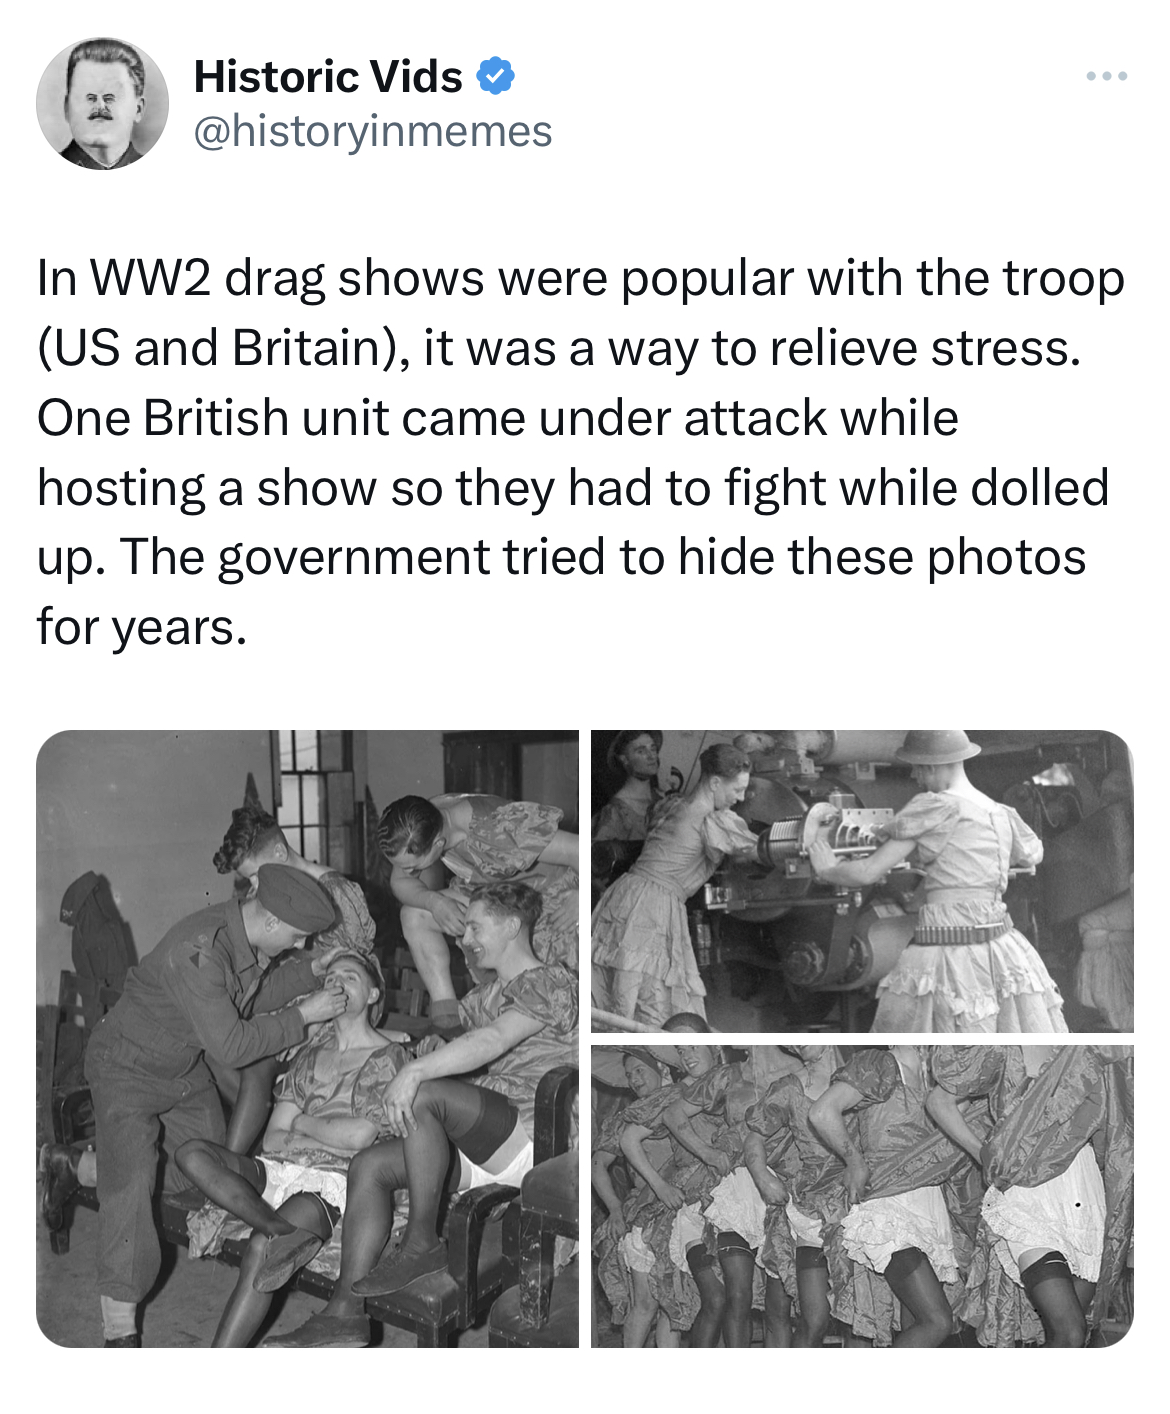 savage and salty tweets - human behavior - Historic Vids In WW2 drag shows were popular with the troop Us and Britain, it was a way to relieve stress. One British unit came under attack while hosting a show so they had to fight while dolled up. The govern